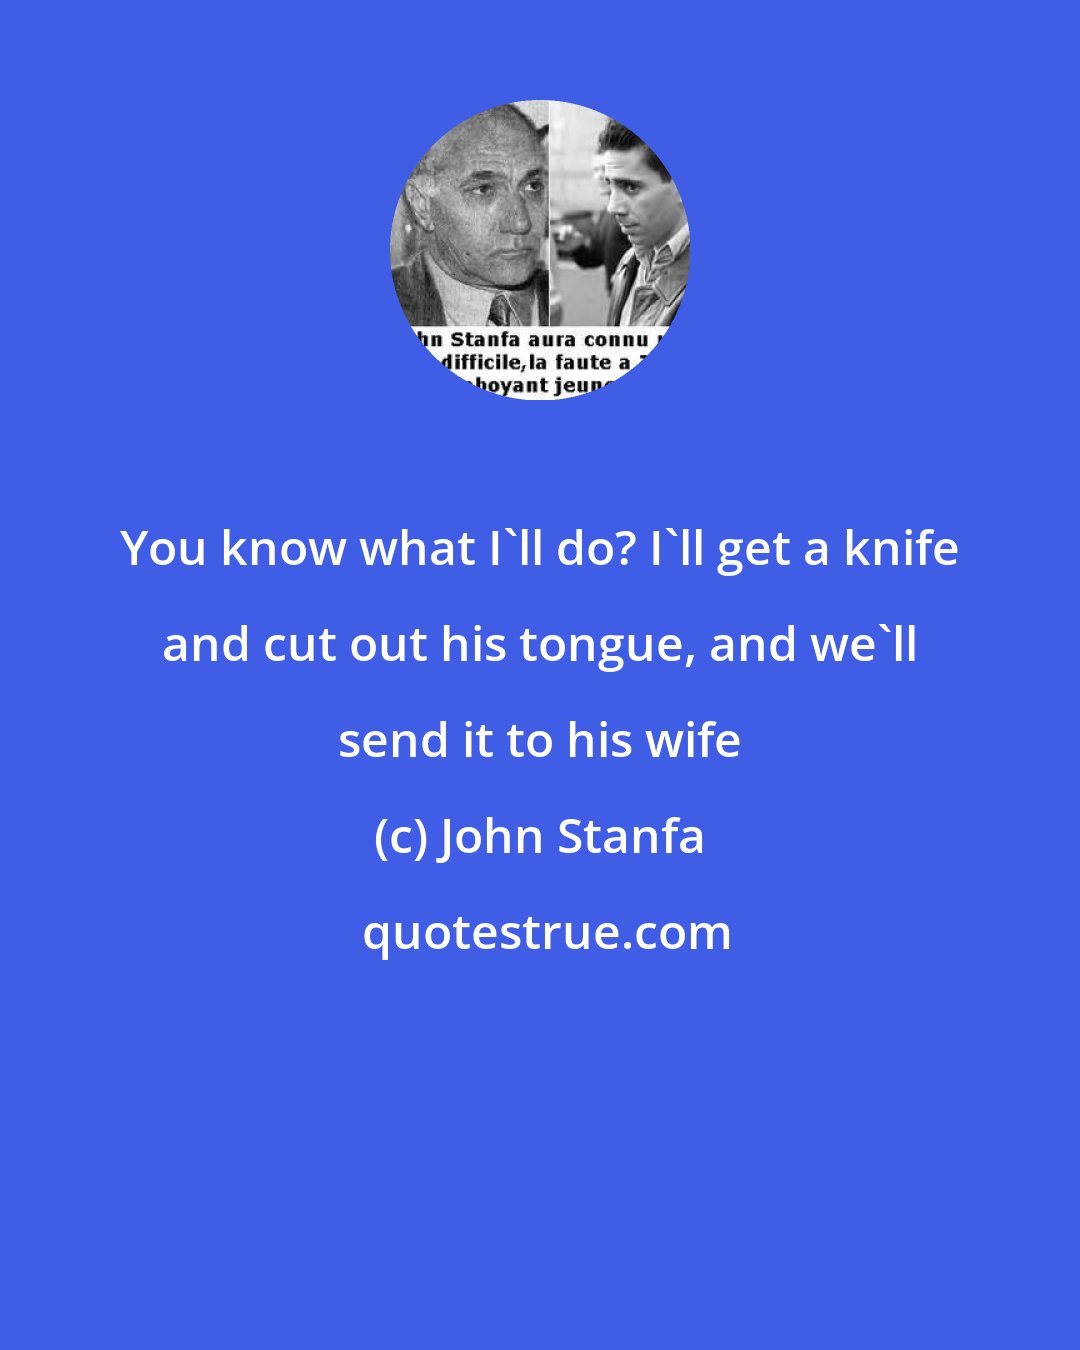 John Stanfa: You know what I'll do? I'll get a knife and cut out his tongue, and we'll send it to his wife